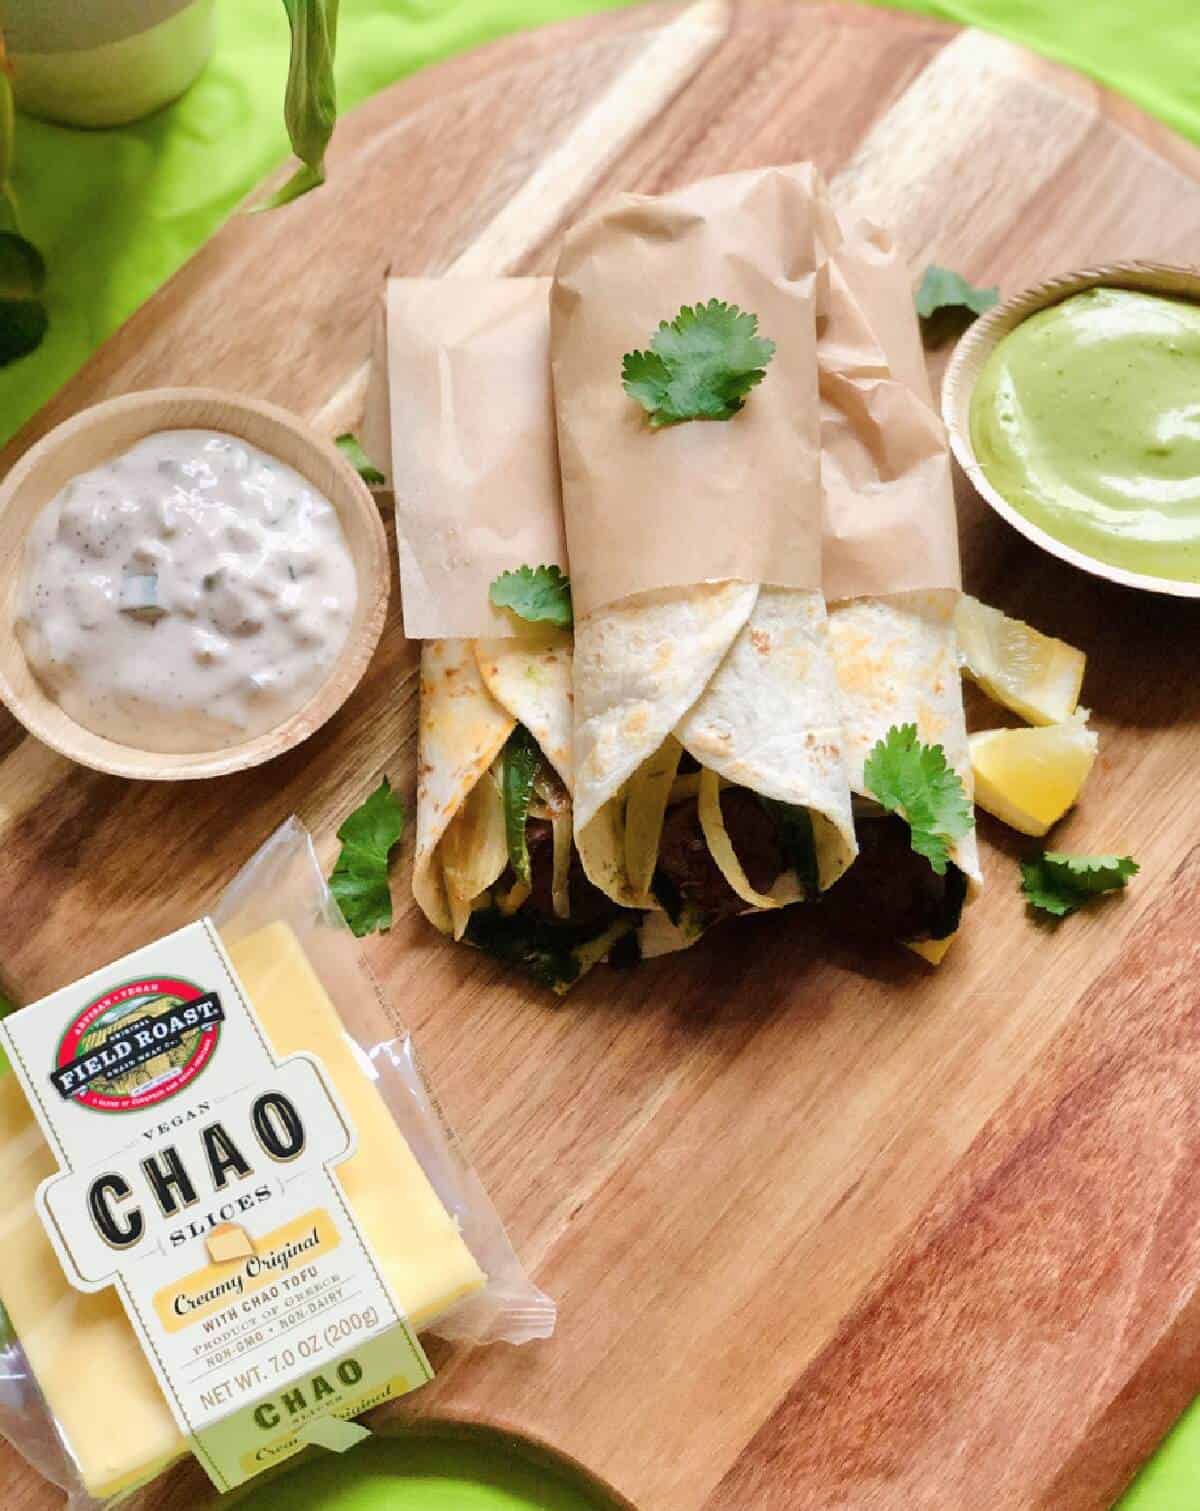 A wooden cutting board filled with rolled up tortillas, creamy dips, a lemon wedge, and a package of Field Roast vegan Chao cheese slices. 